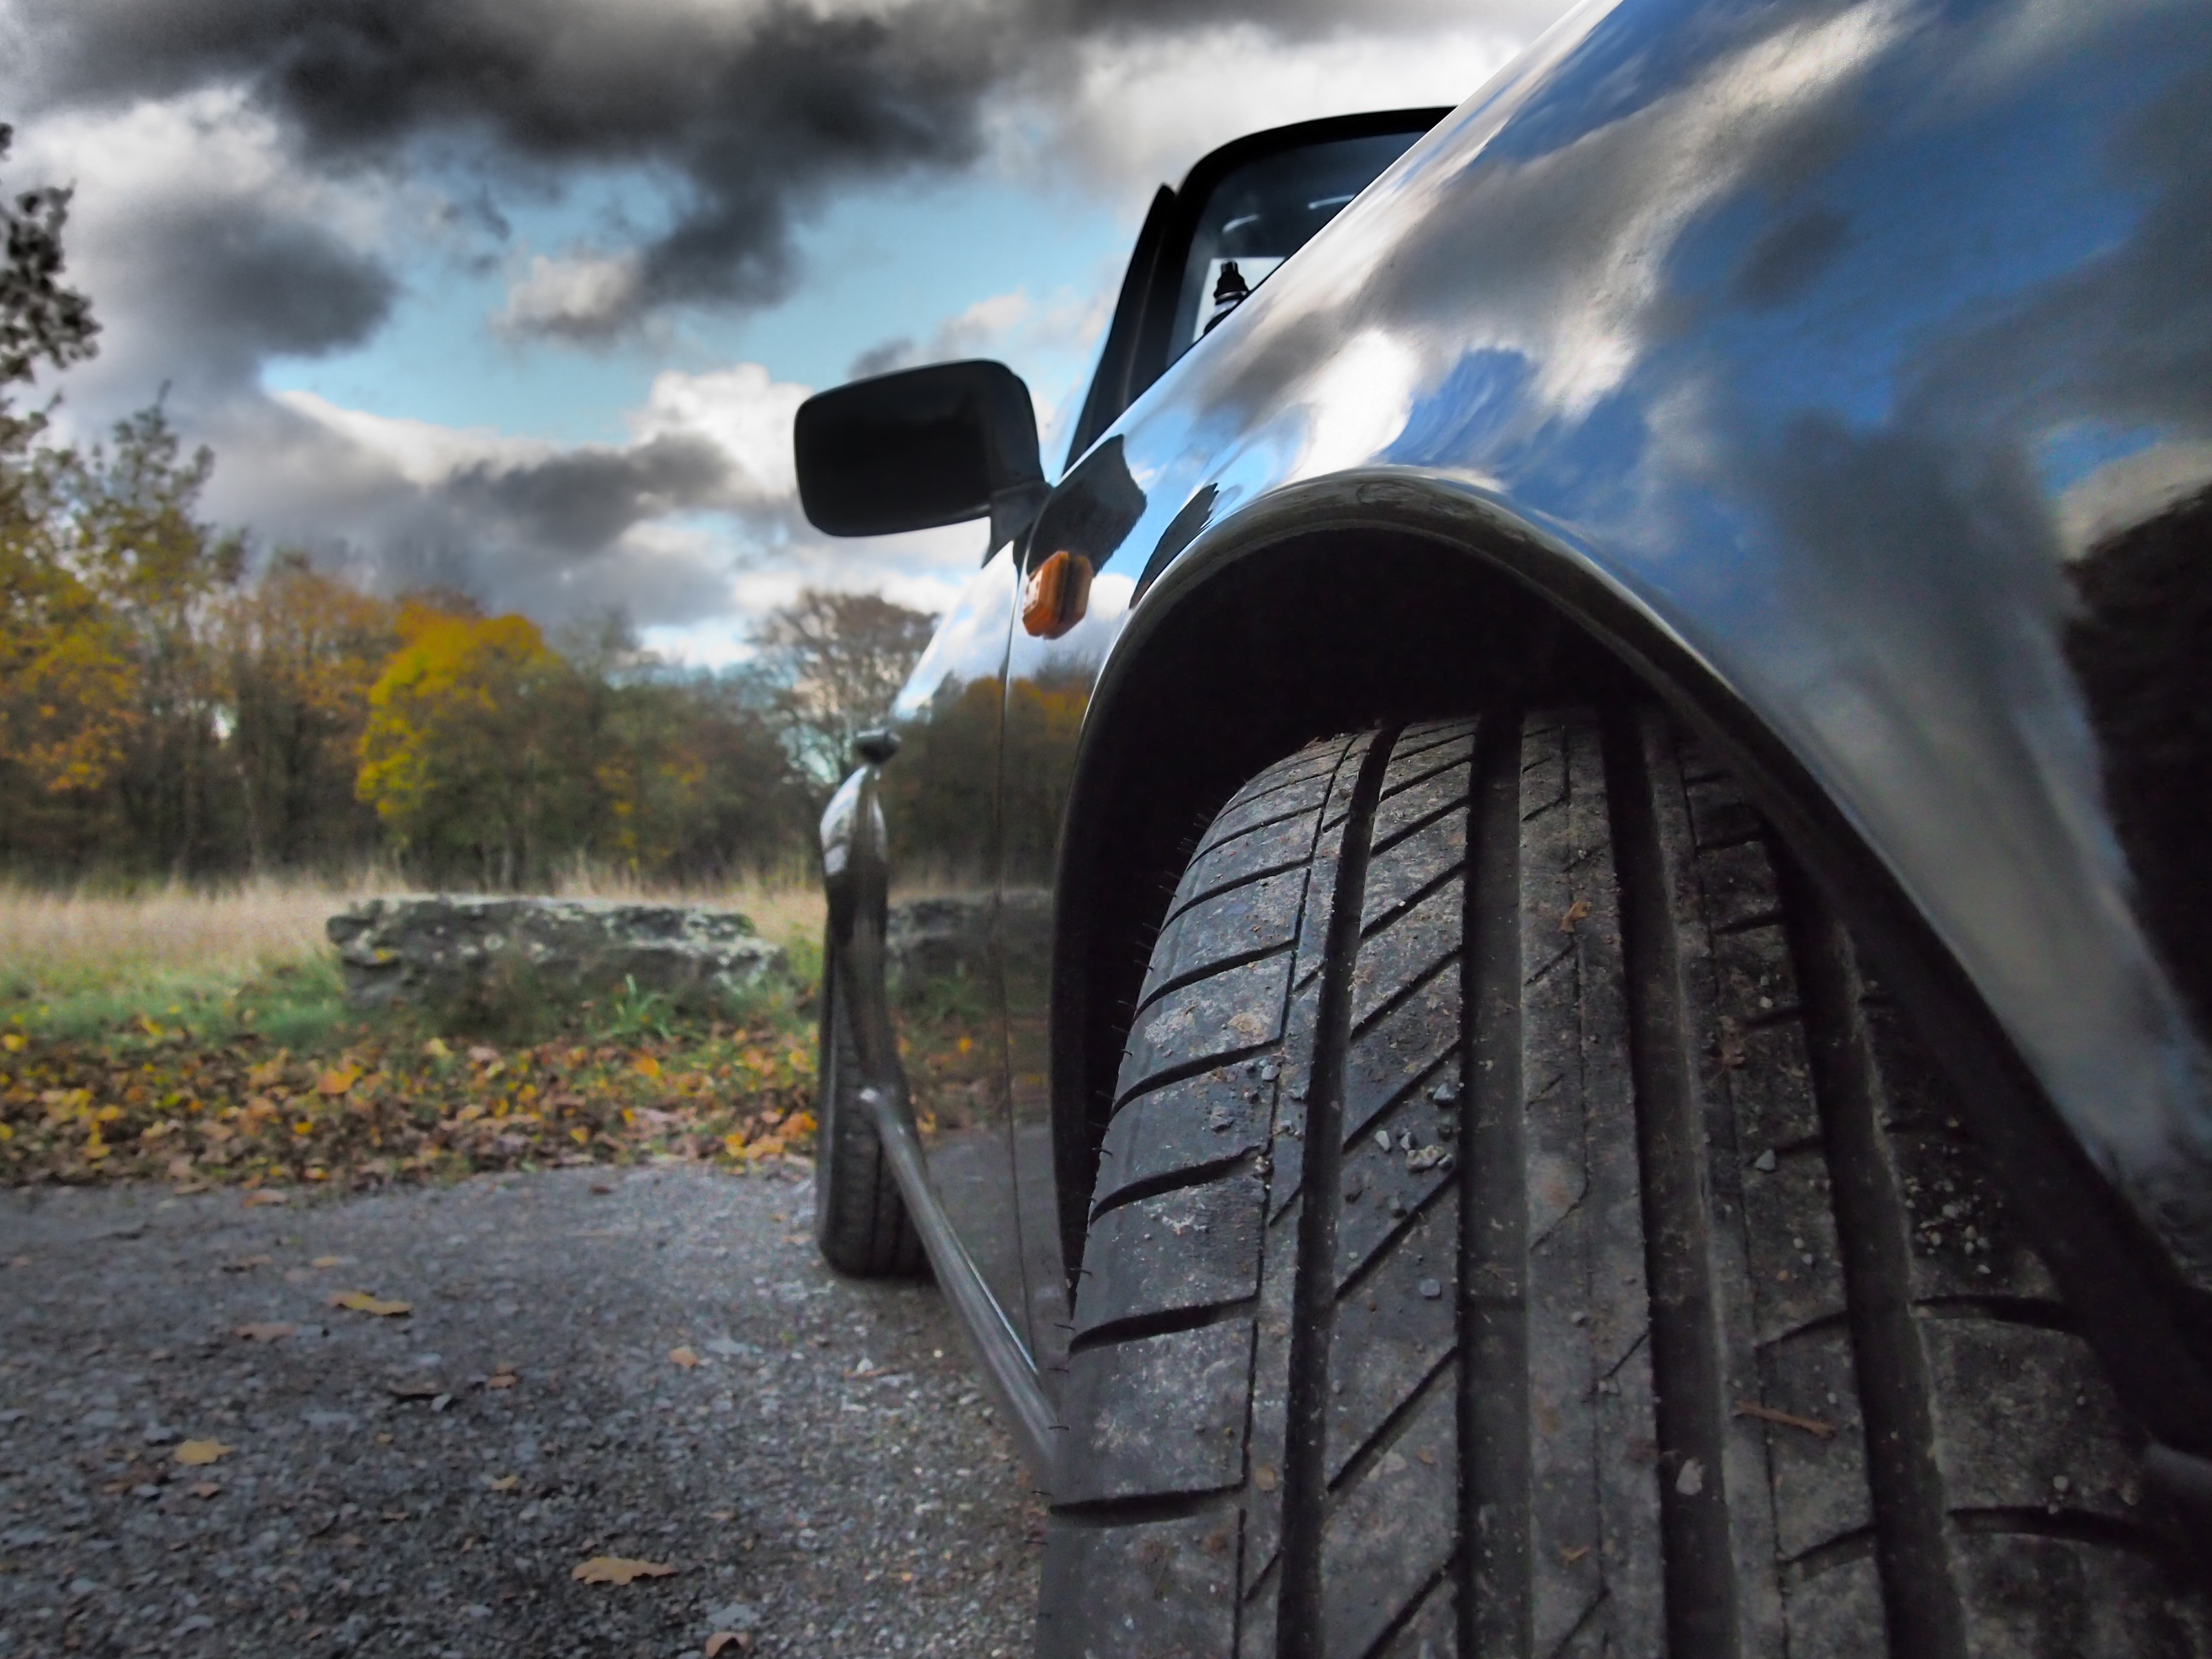 view of tire of car